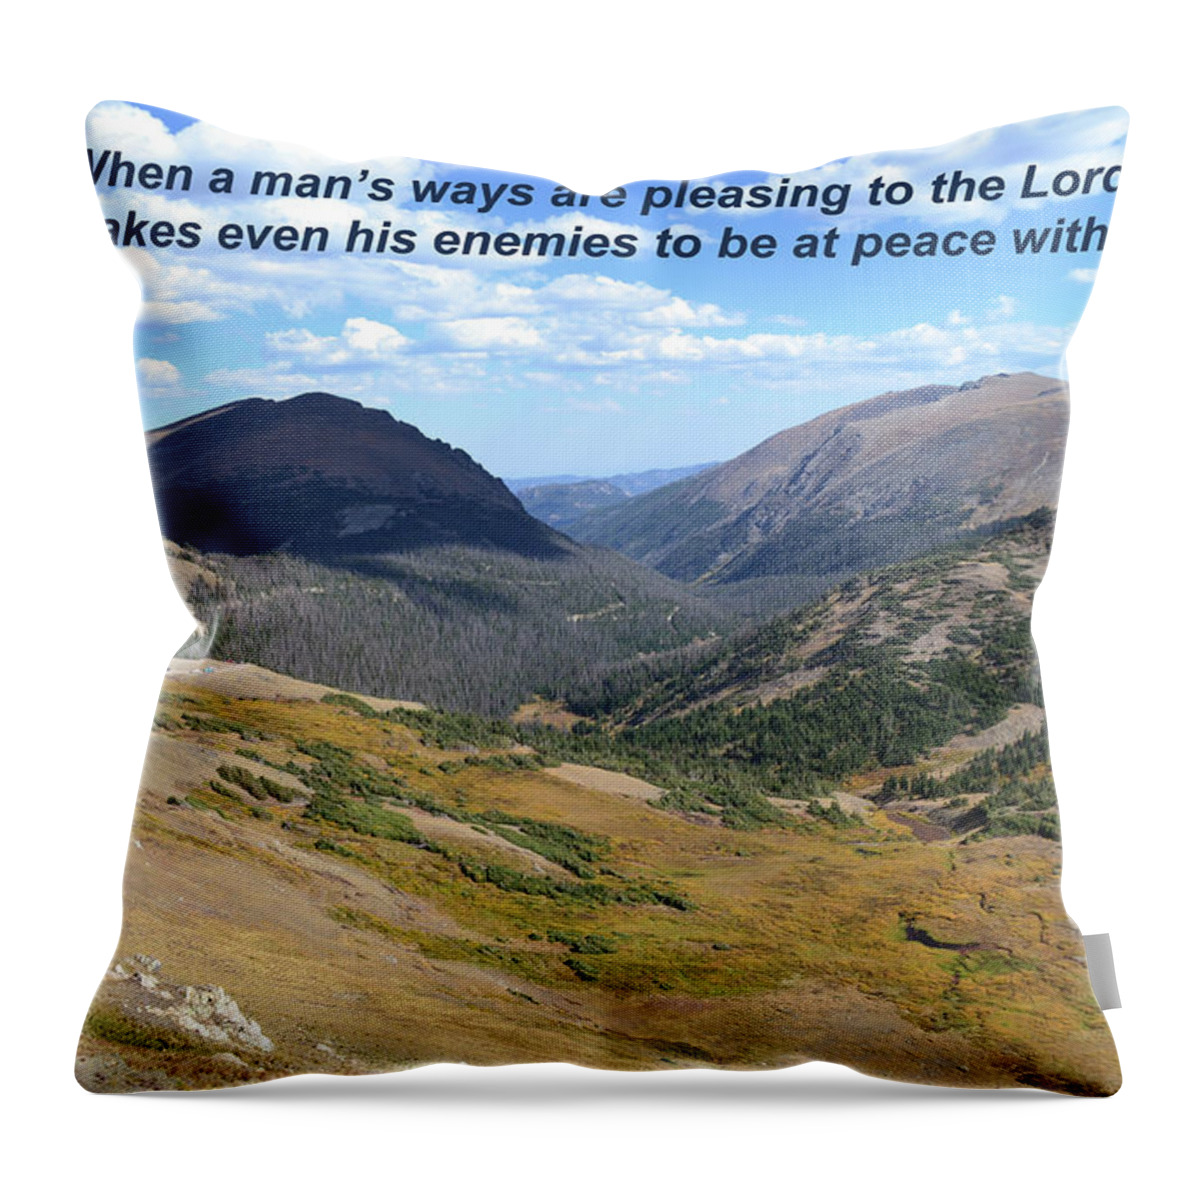  Throw Pillow featuring the mixed media Proverbs 16 7 by Lori Tondini